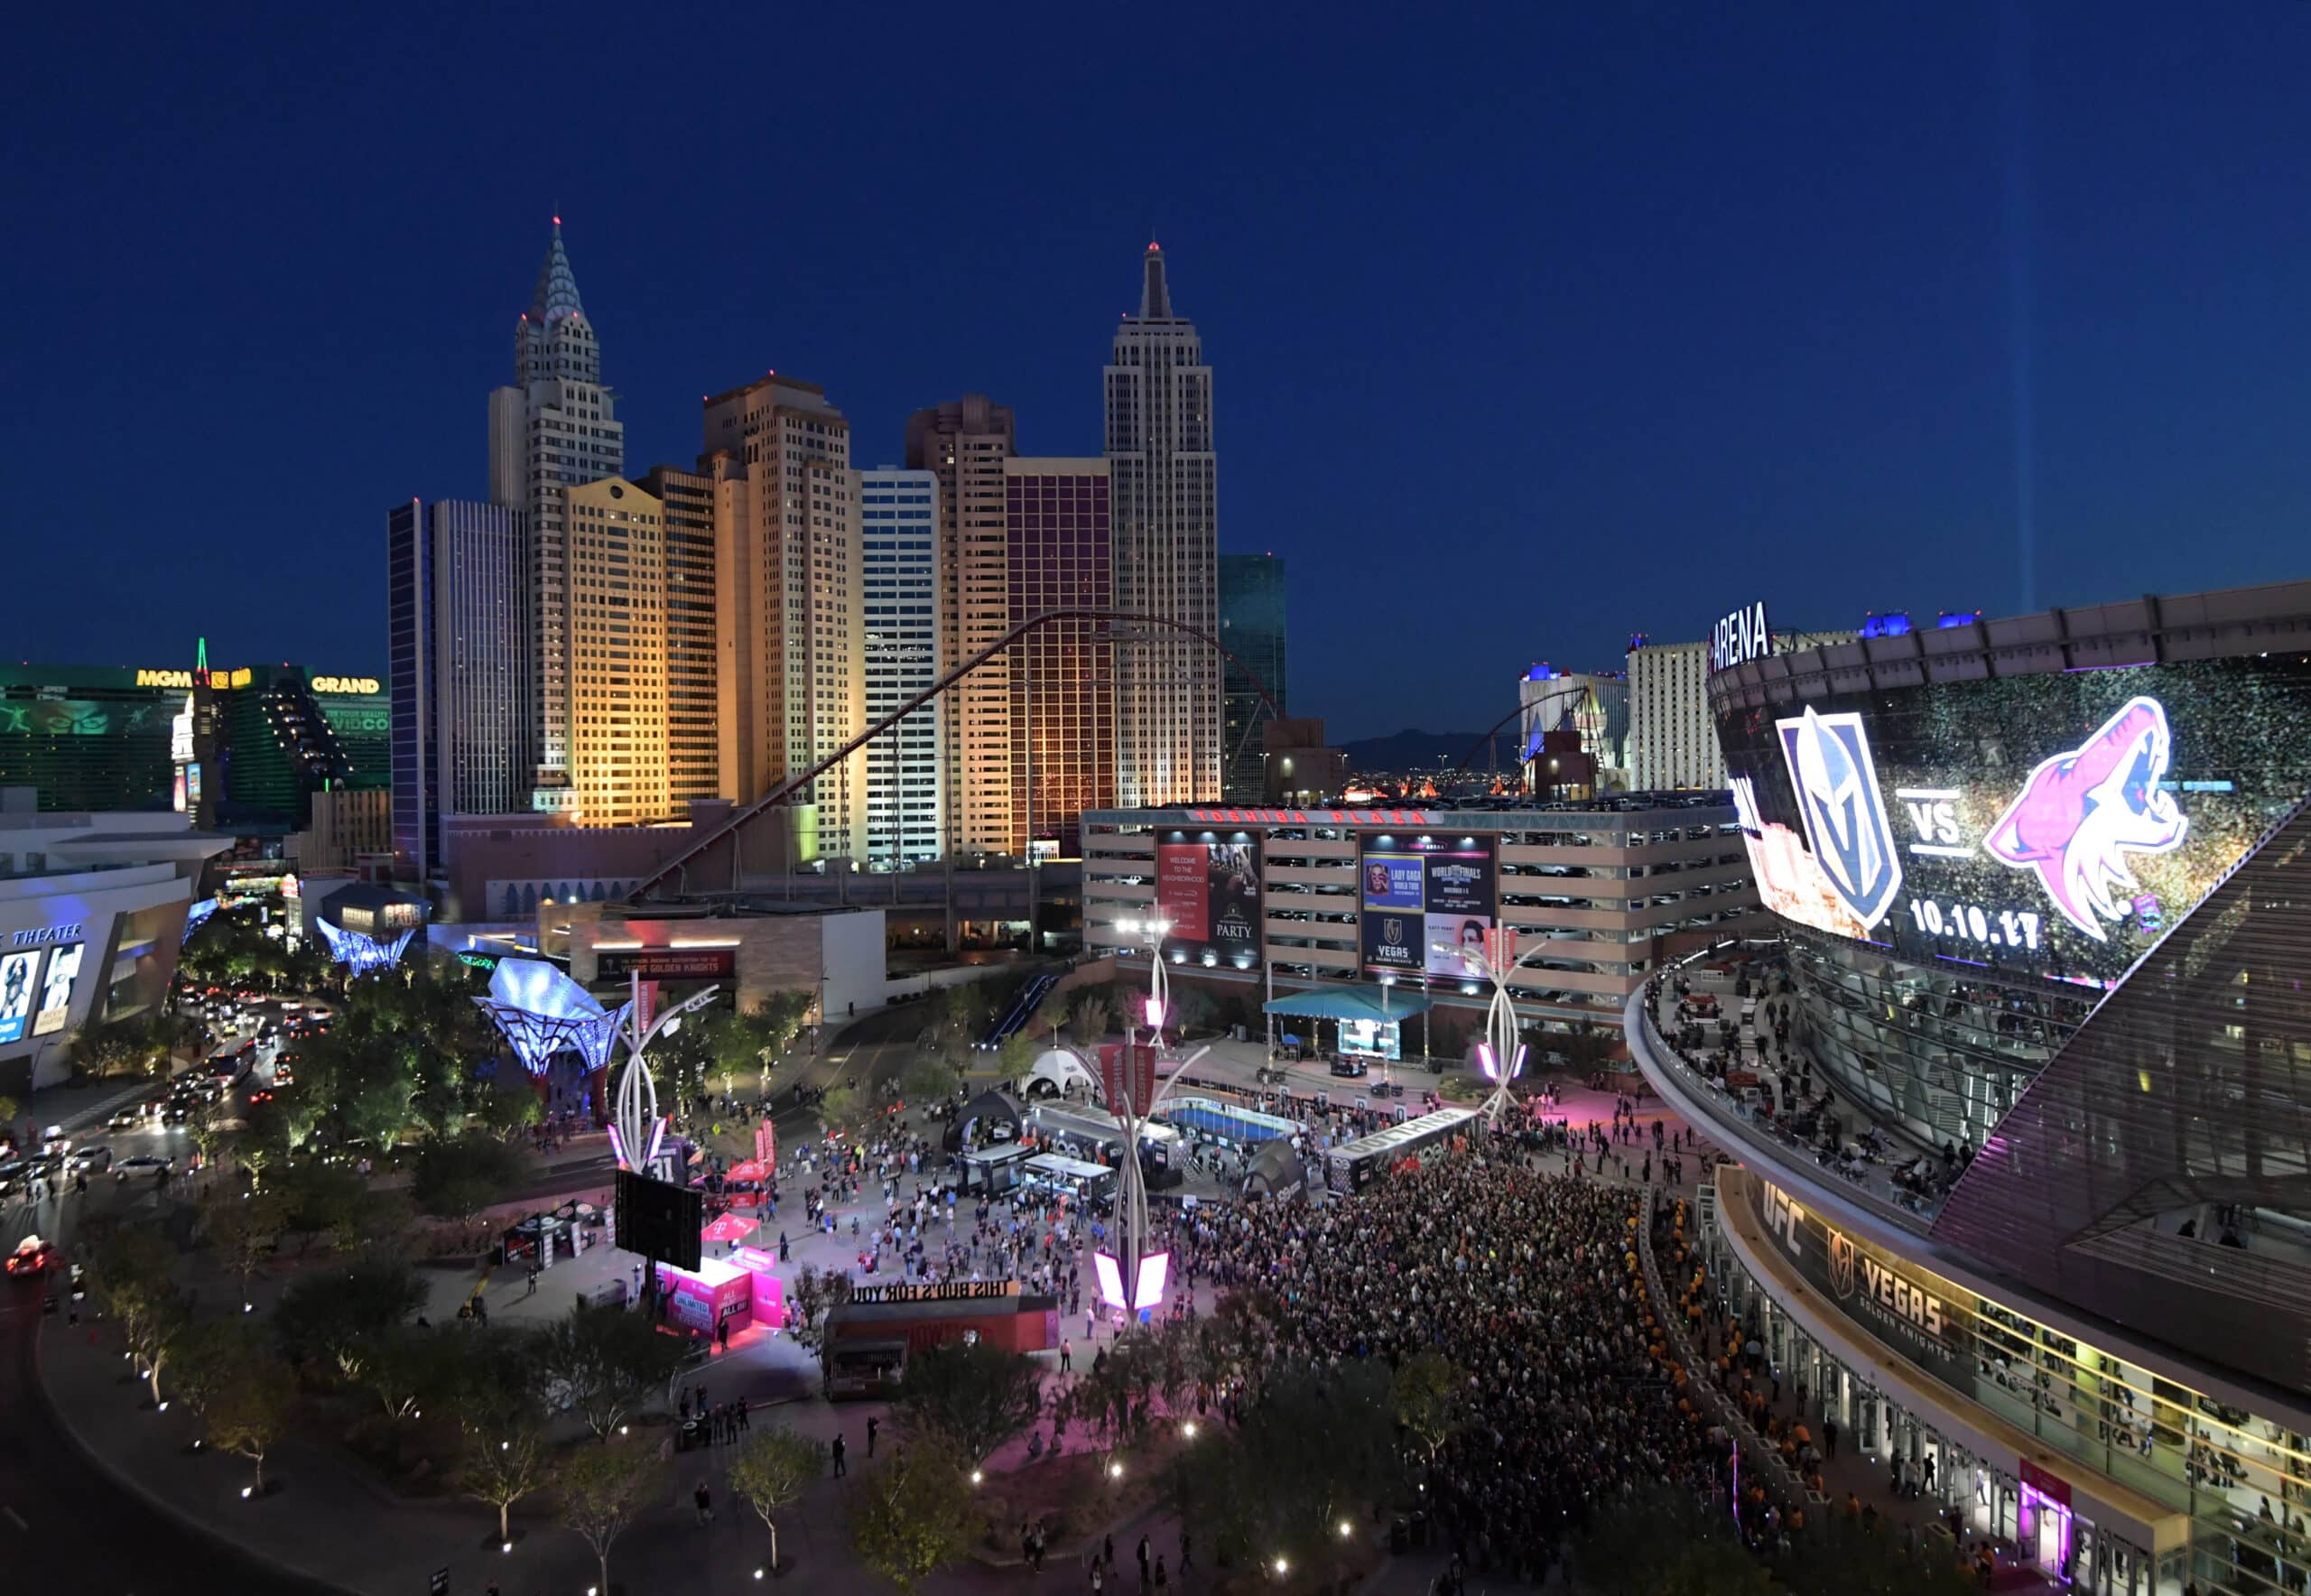 Las Vegas has become a mecca of professional and college sports events.